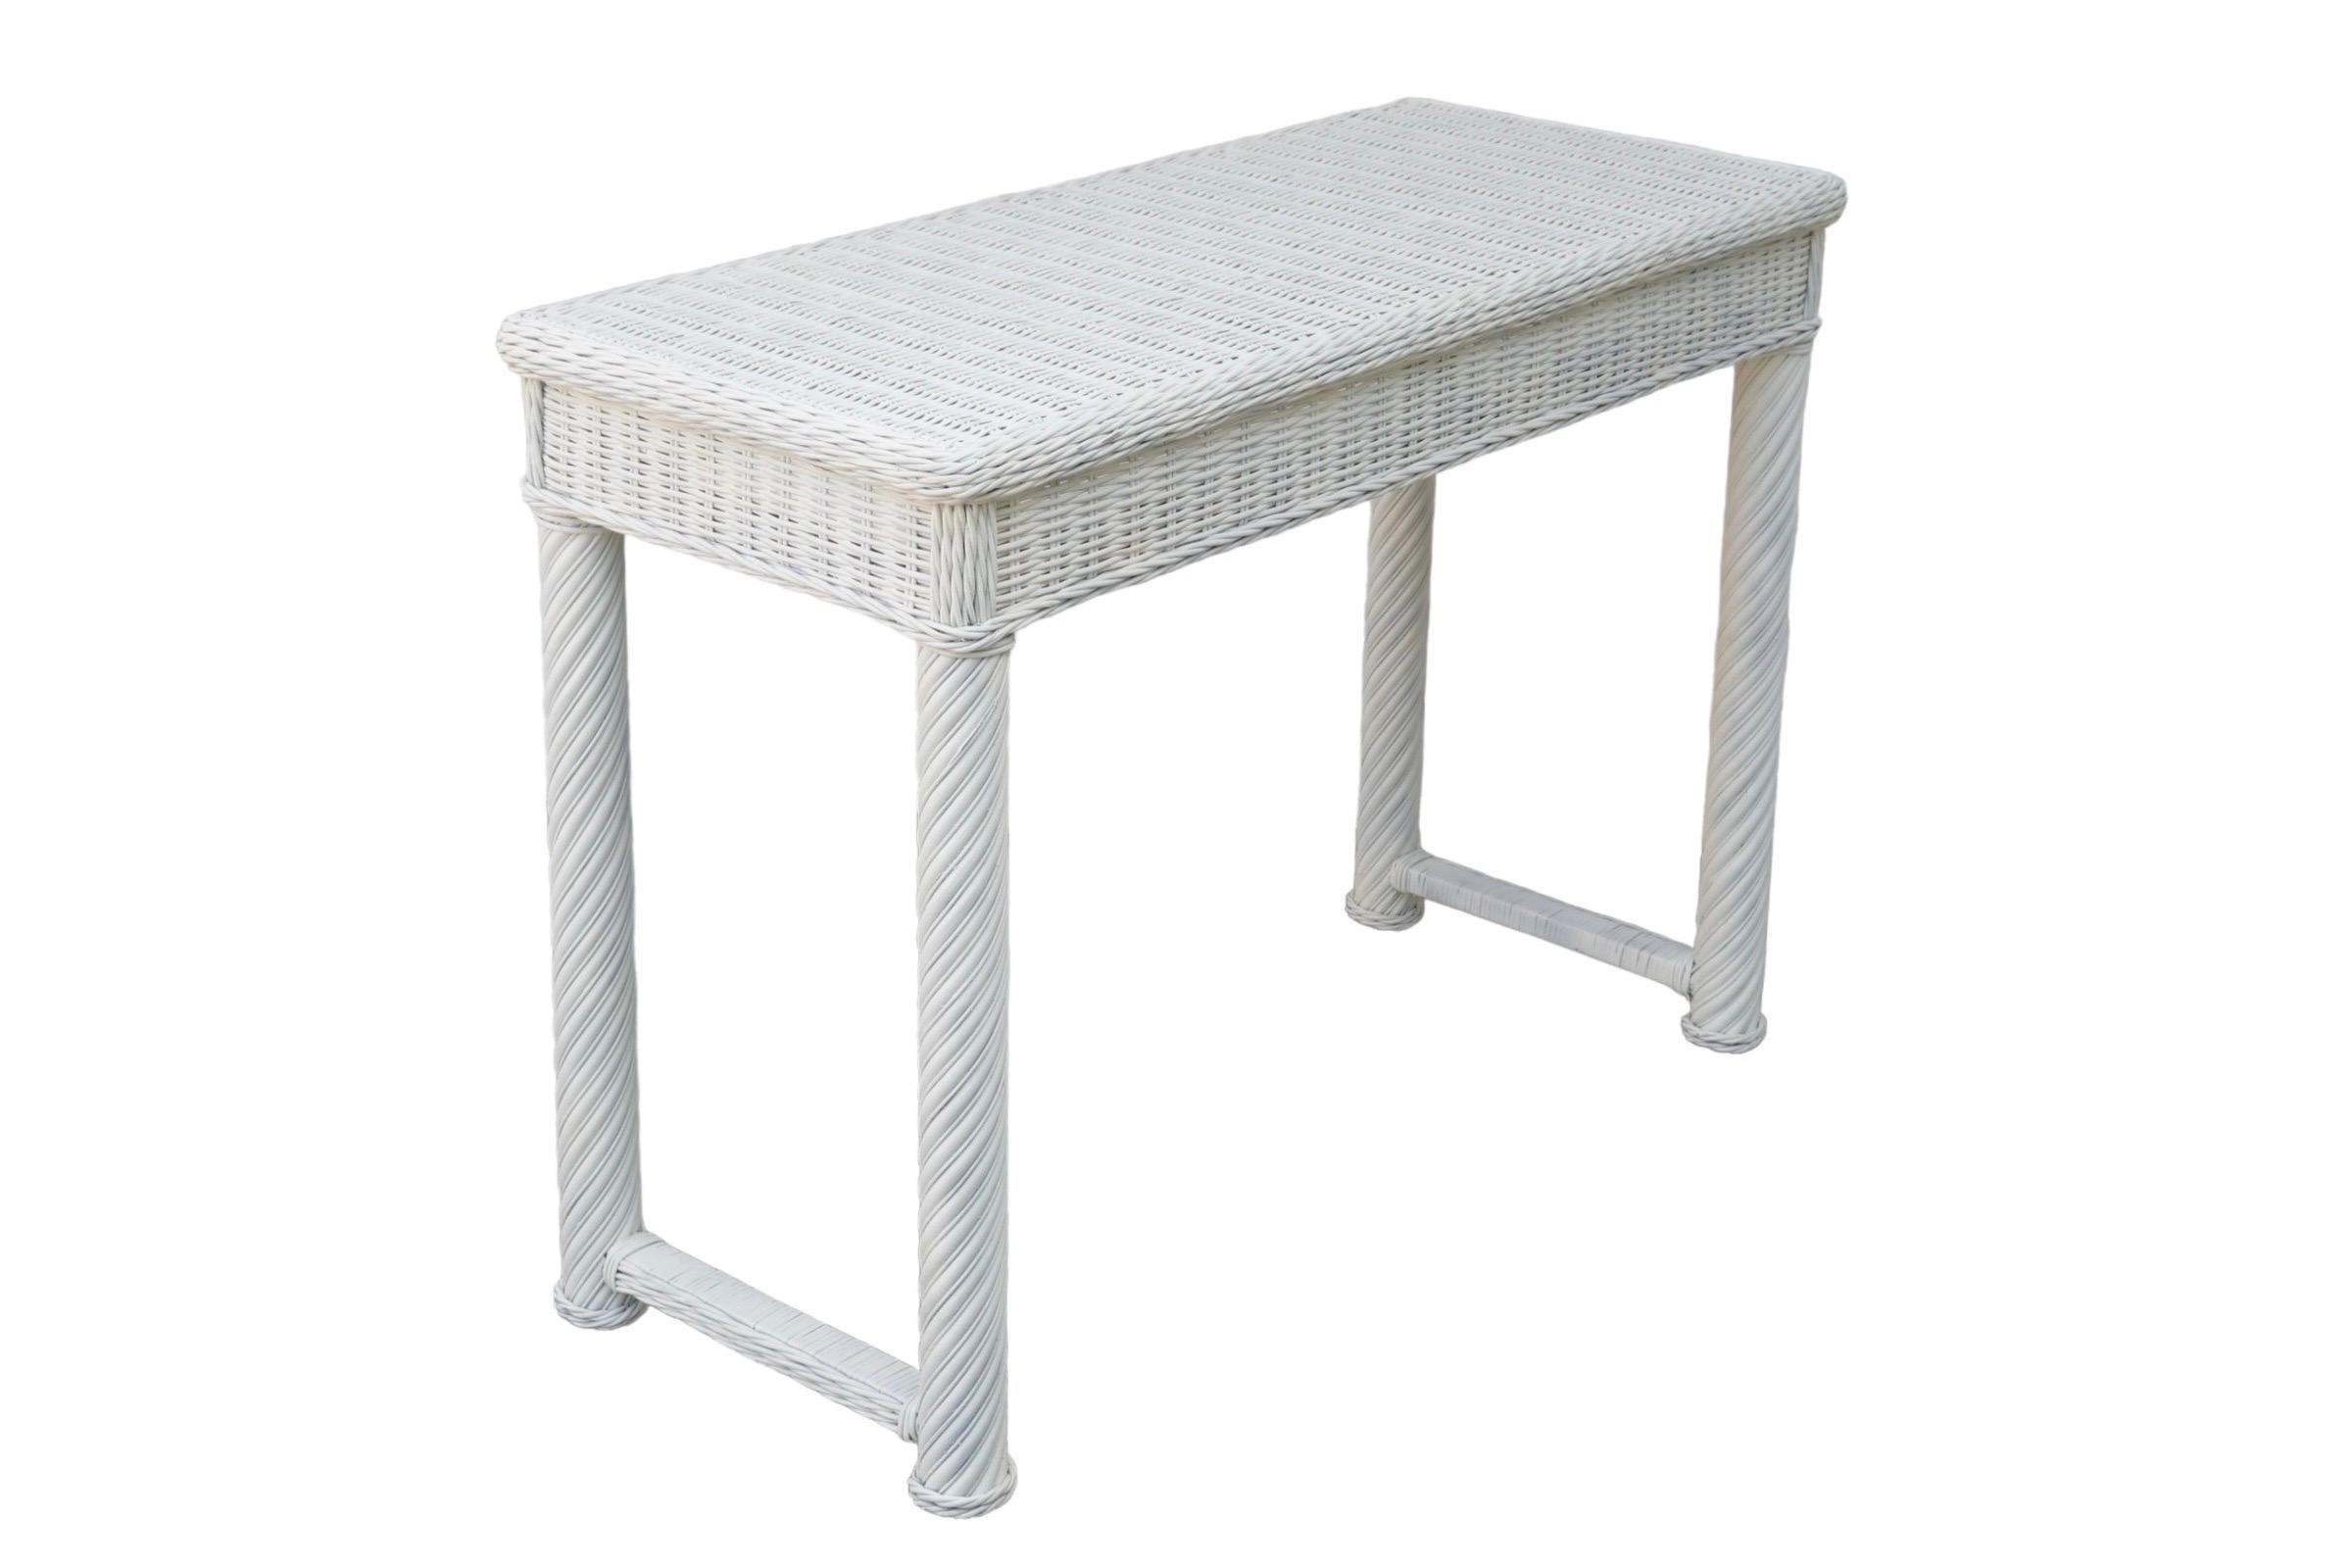 White Woven Rattan Hall Table In Good Condition For Sale In Bradenton, FL